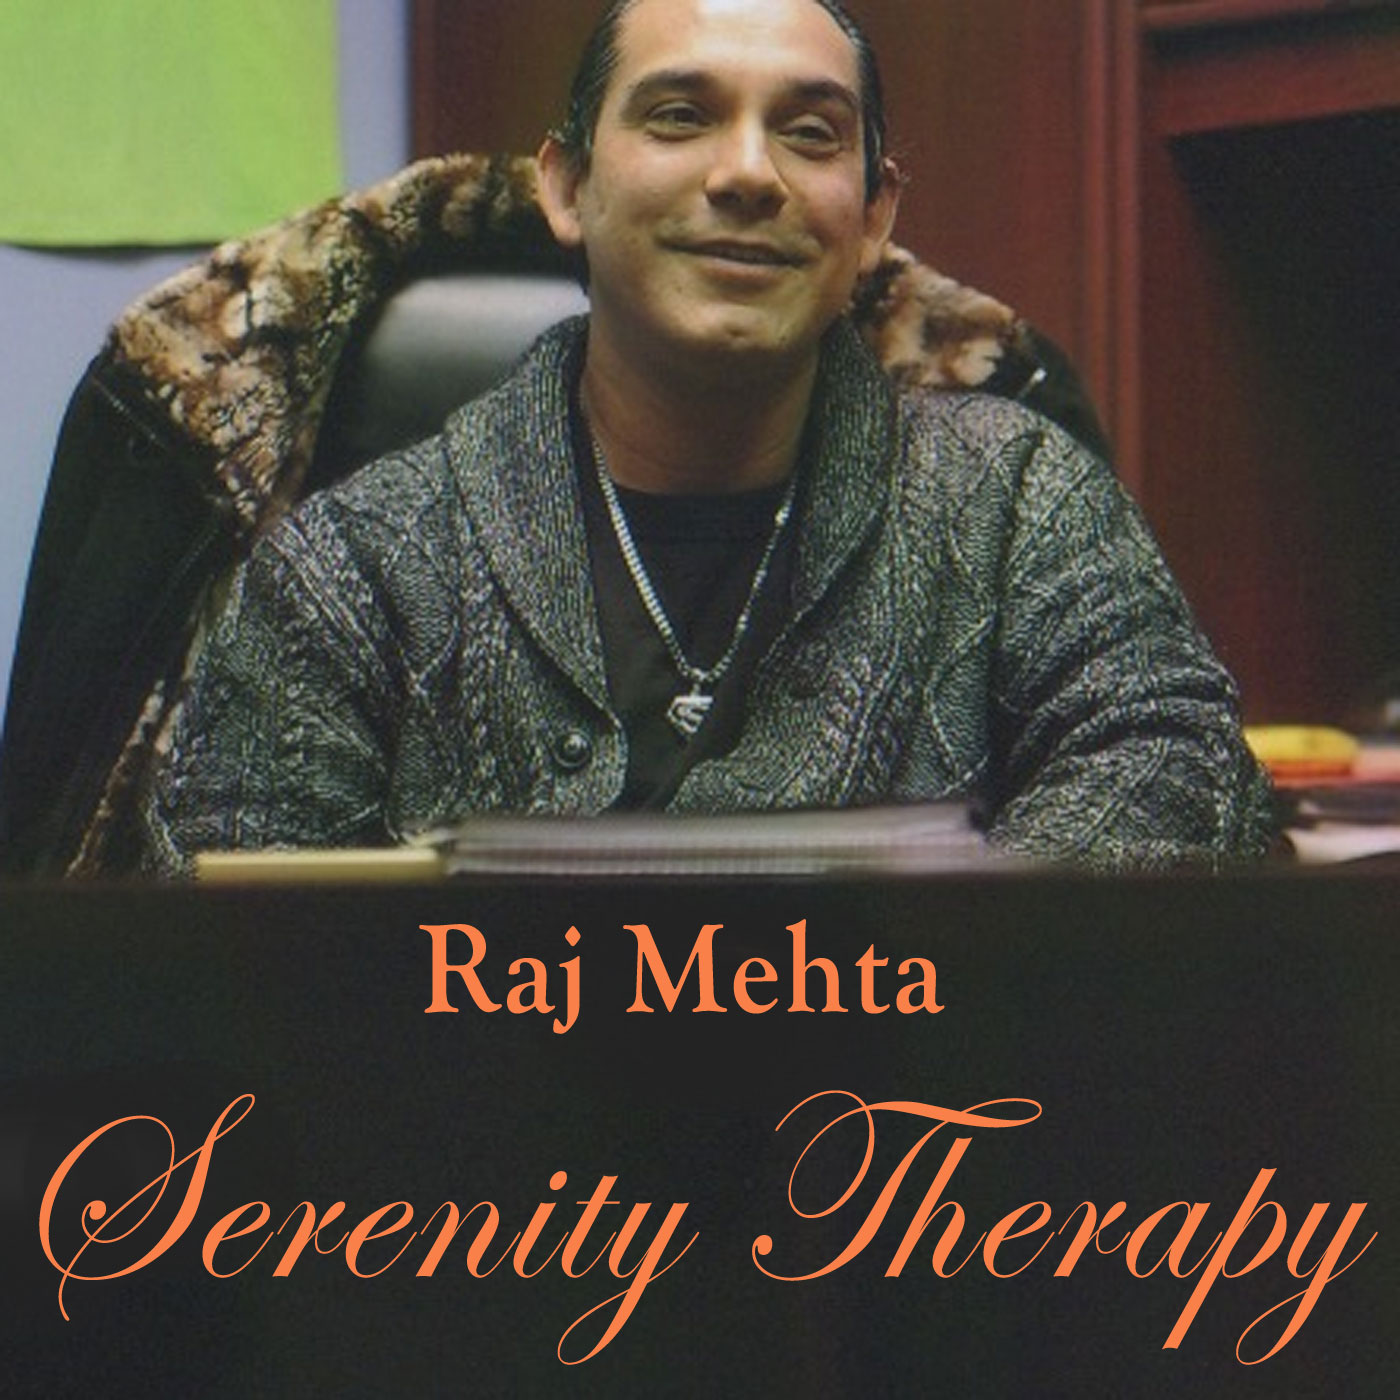 Serenity Therapy: Raj Mehta's Lectures on Addiction